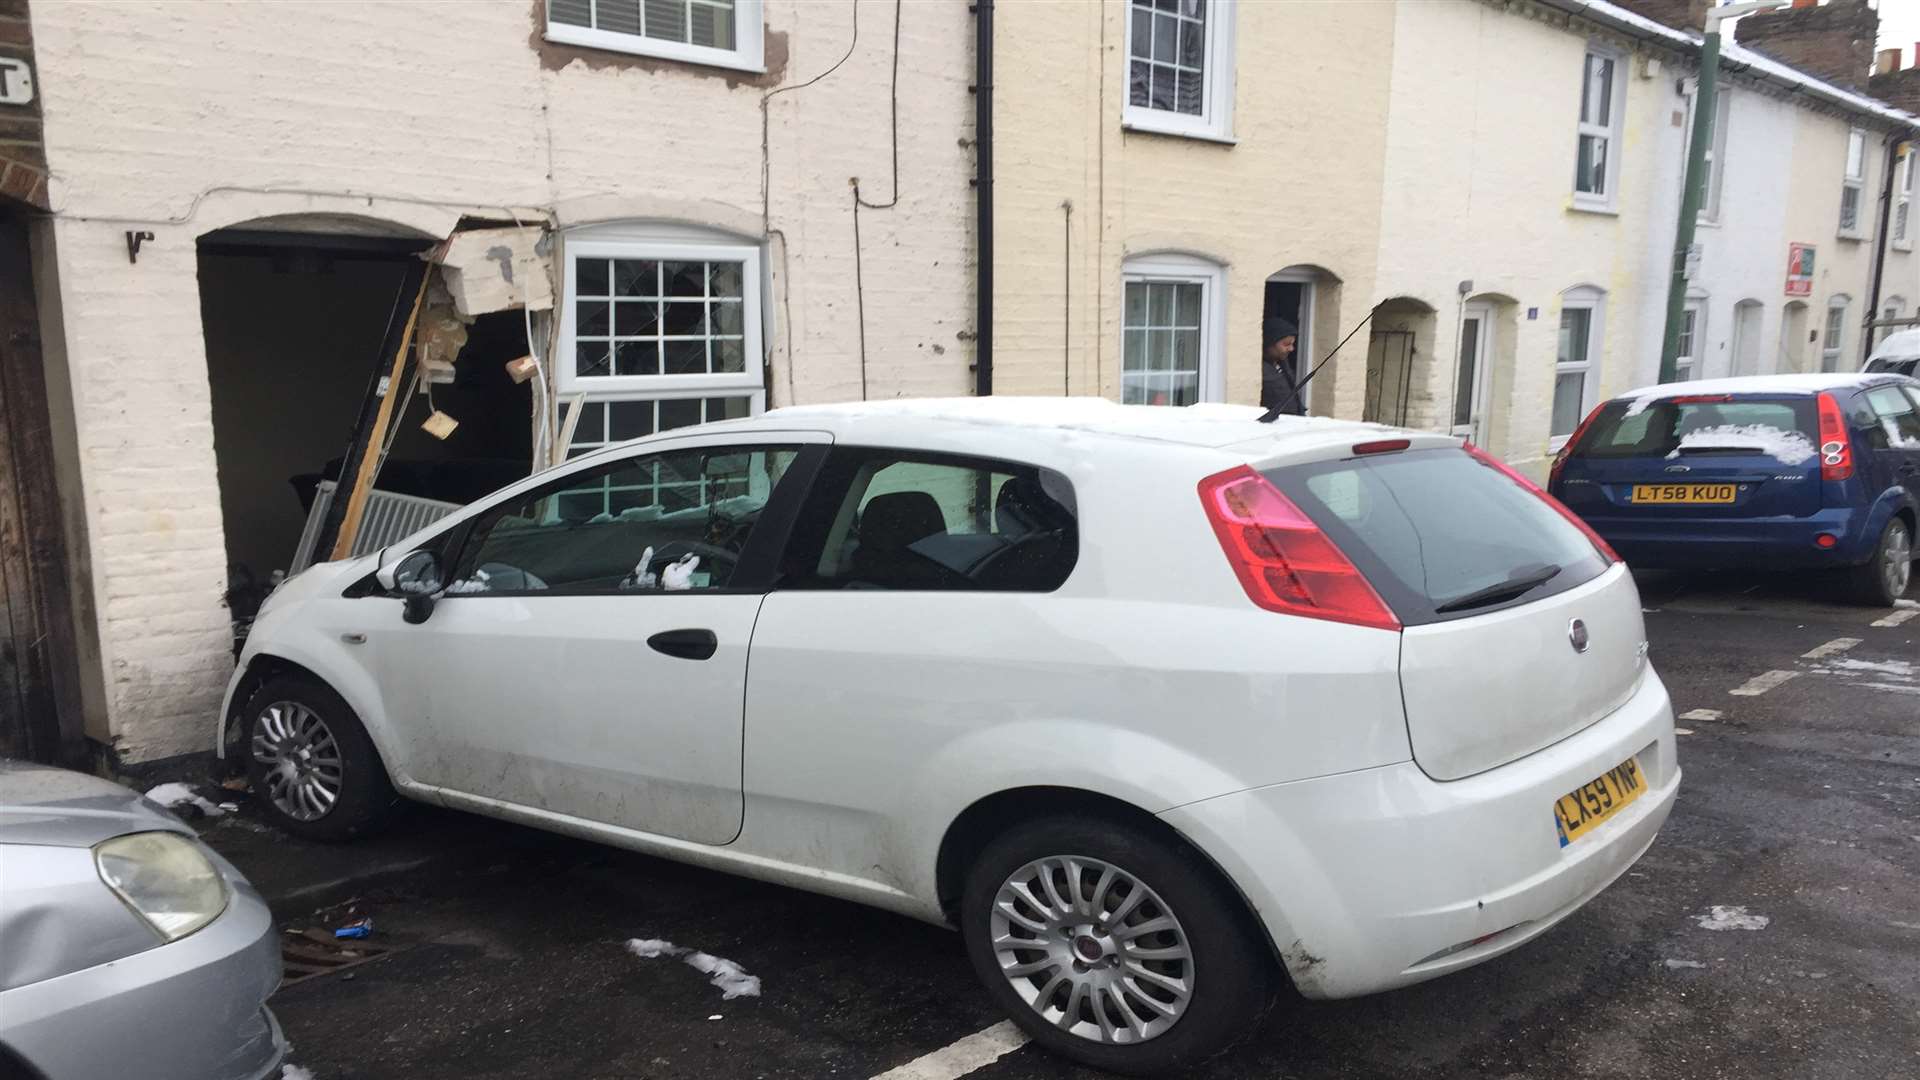 Mr Holloway crashed his car into a house in Lucerne Street, Maidstone.